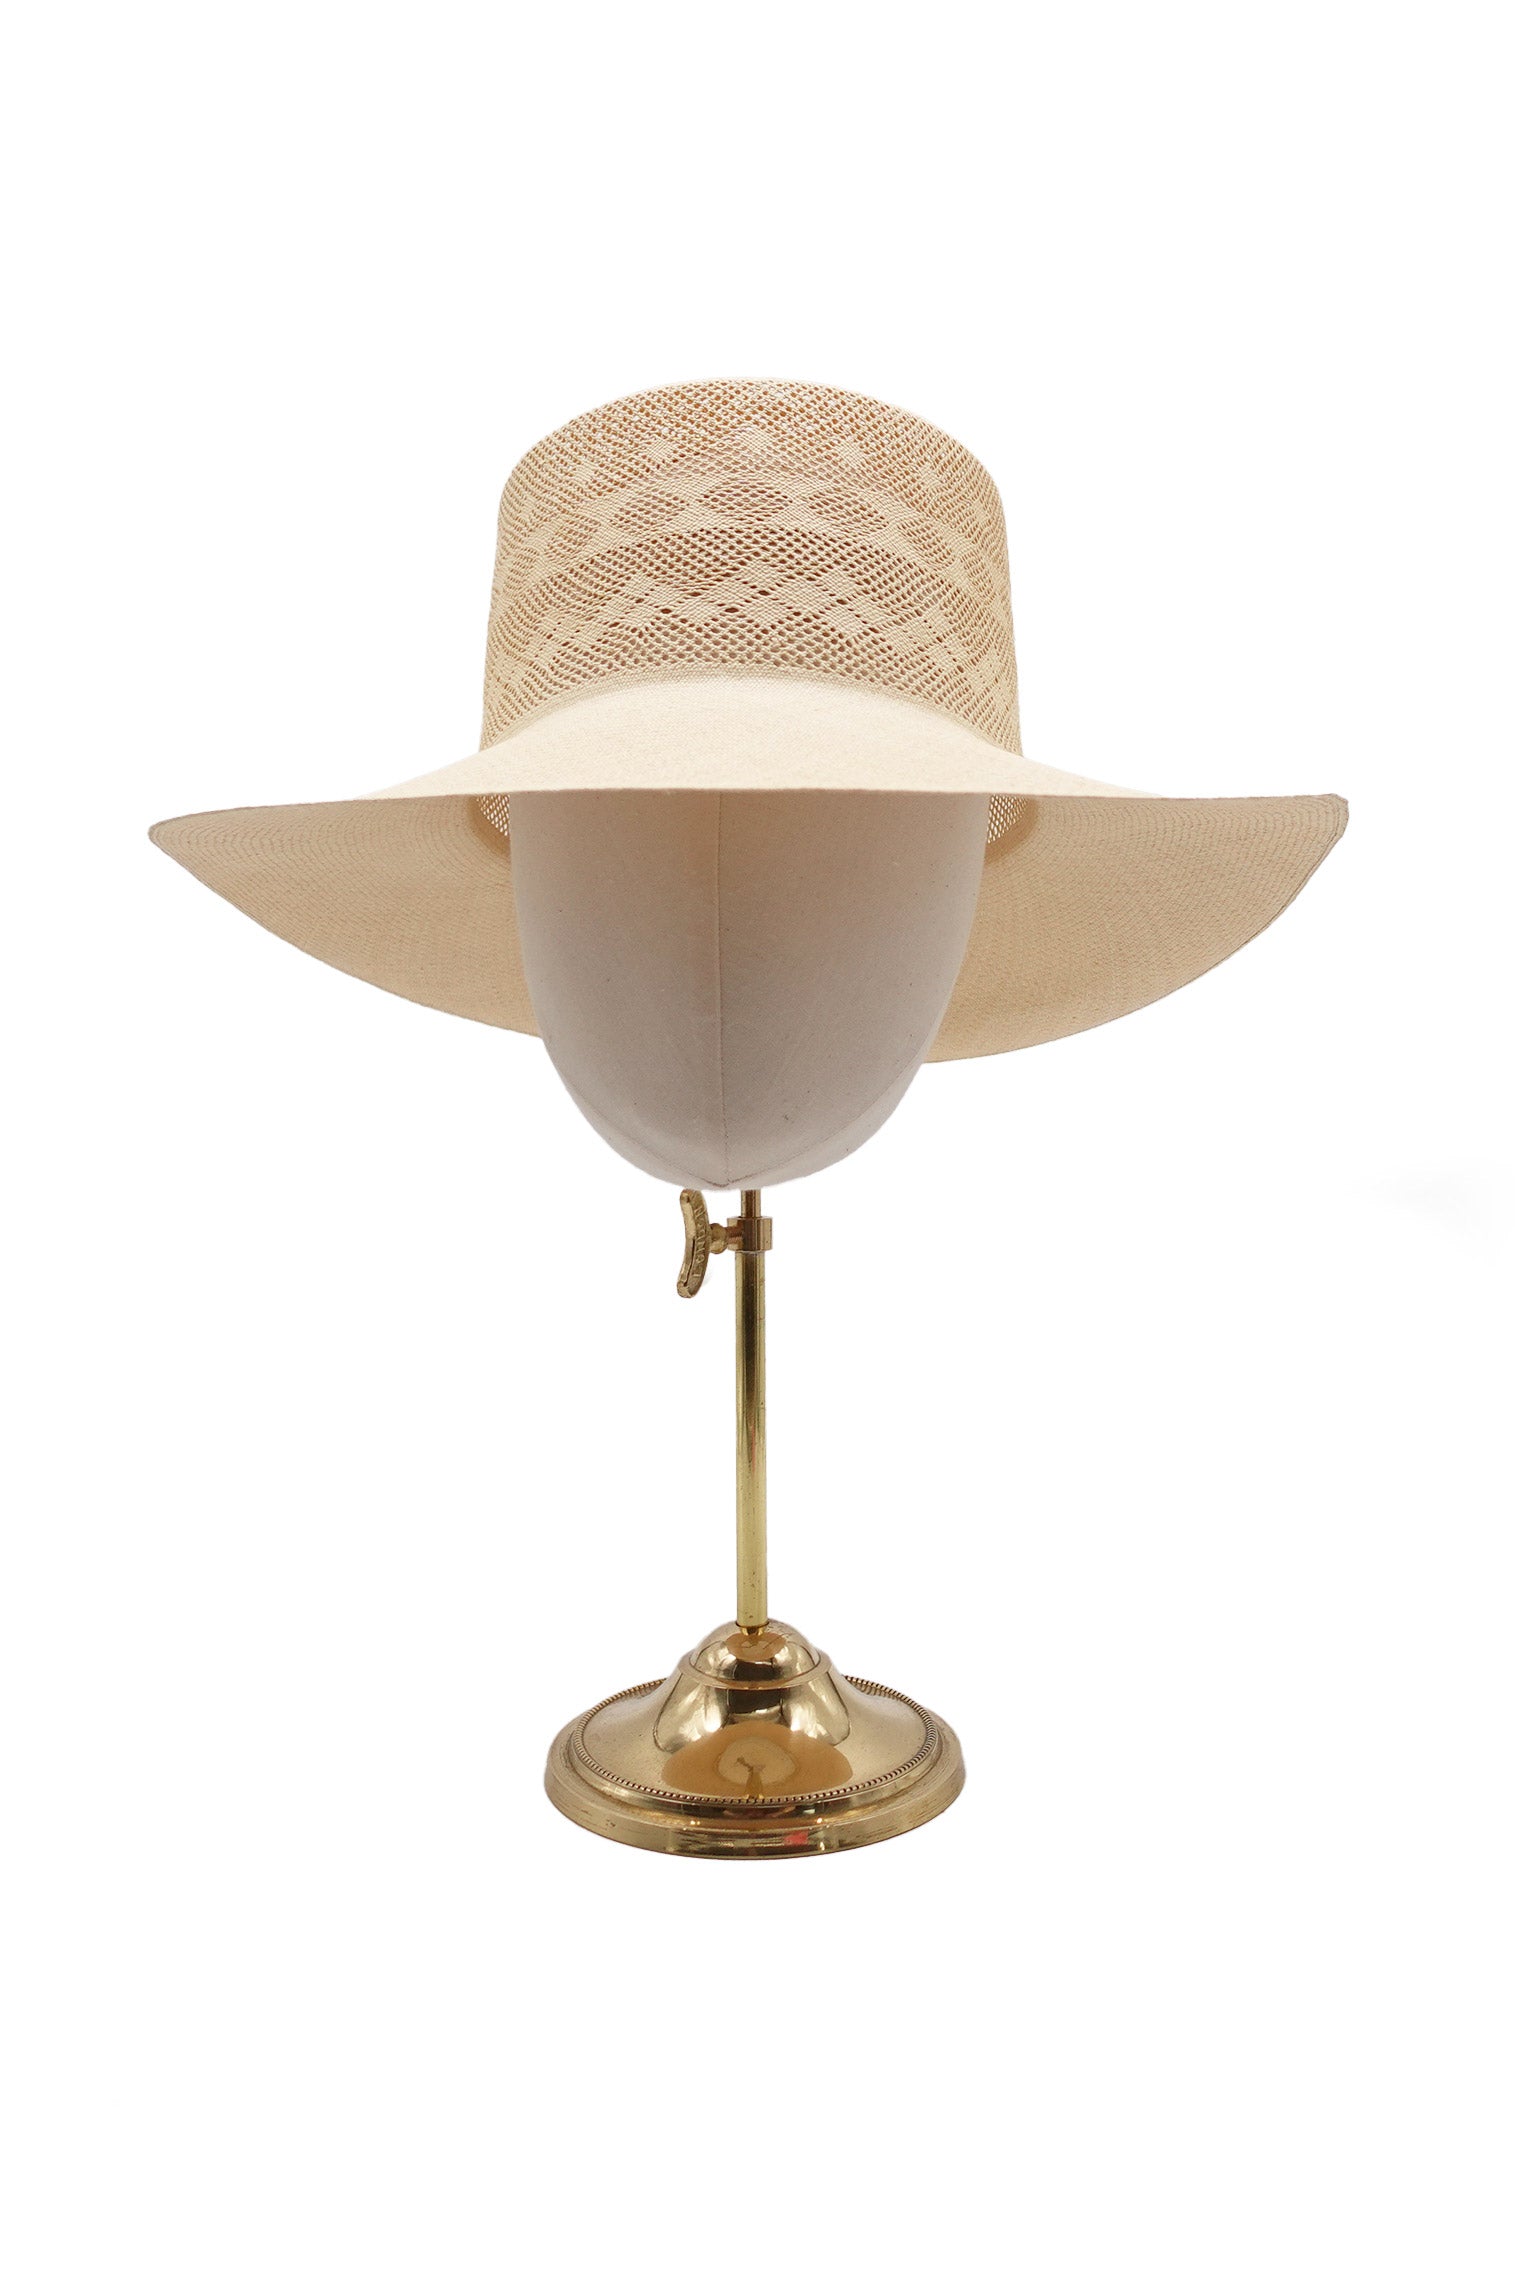 Eve Woven Panama - The Bespoke Embroidered Panama Hat Collection - Lock & Co. Hatters London UK